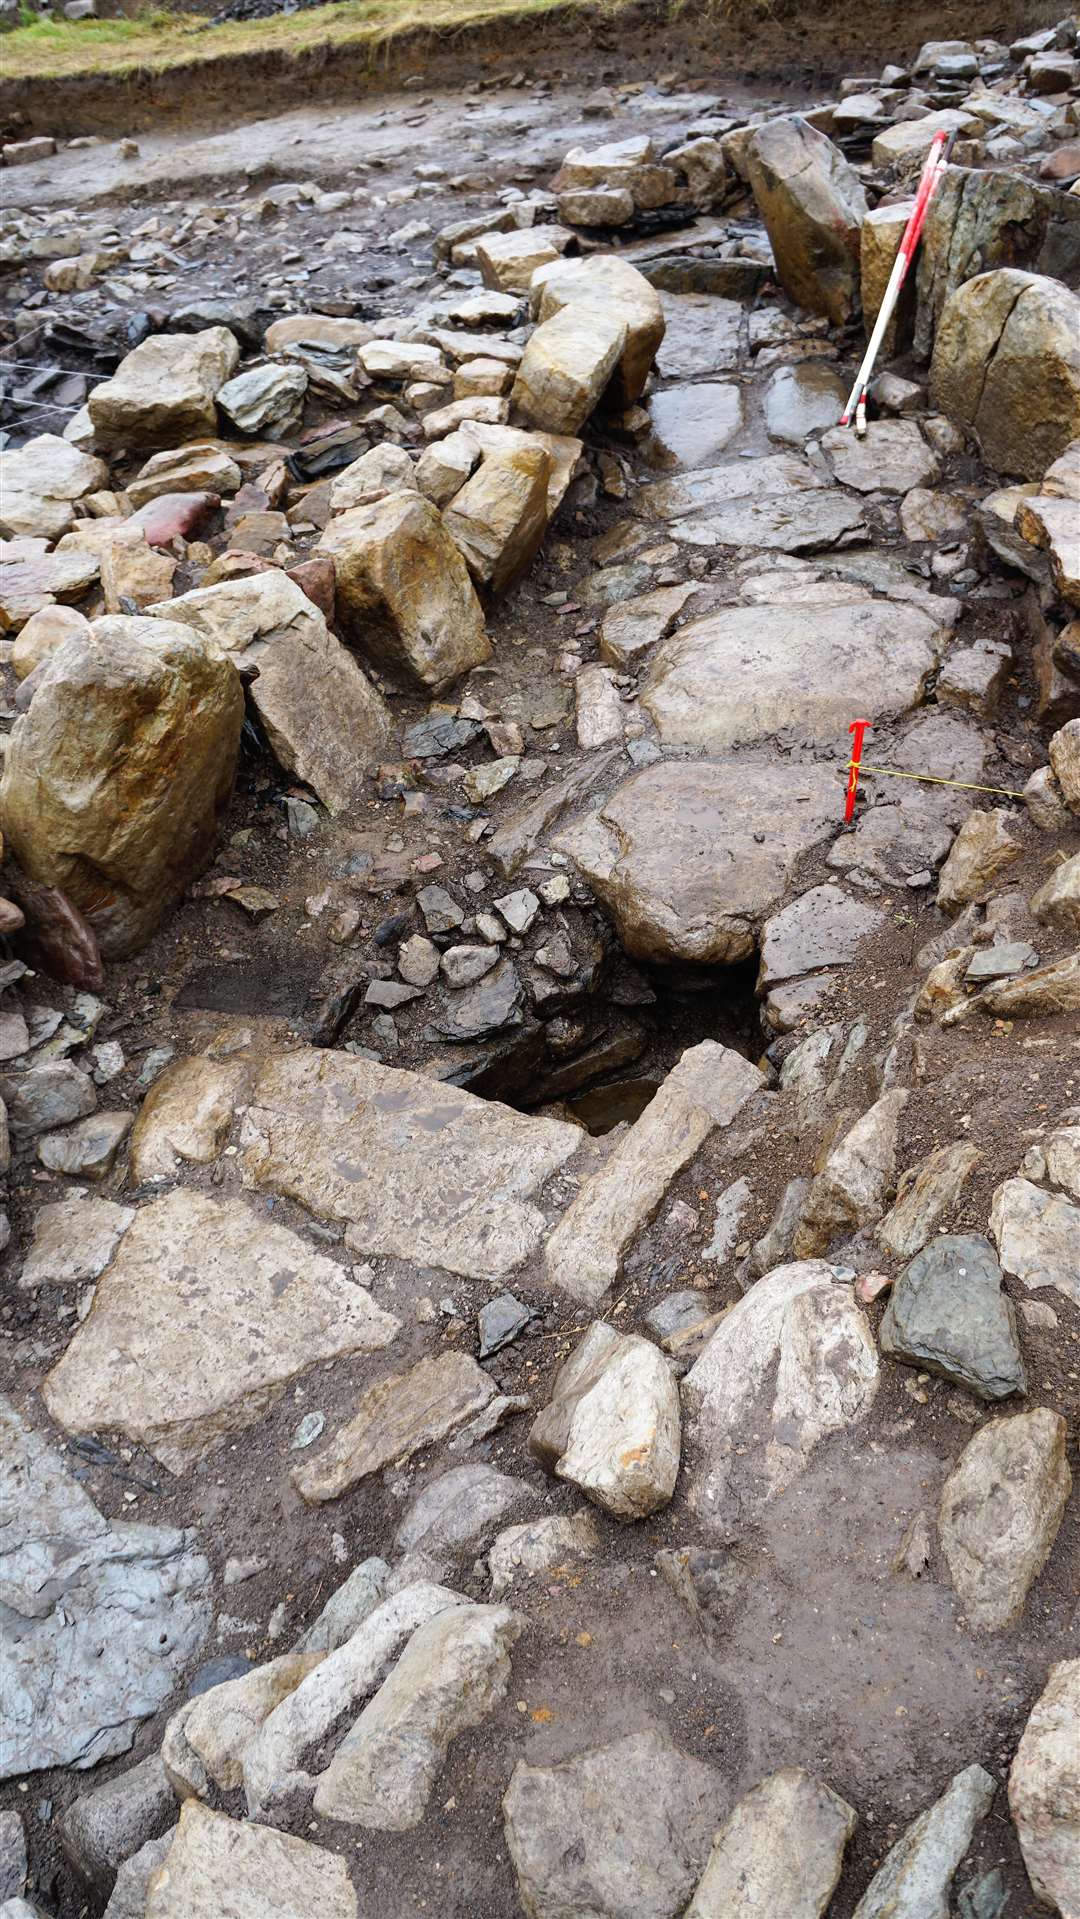 This part of the dig at Swartigill appears to be a souterrain and may have been used to store food. It was recently discovered that there are channels under it that may have allowed water to flow through to help cool and preserve the larder.